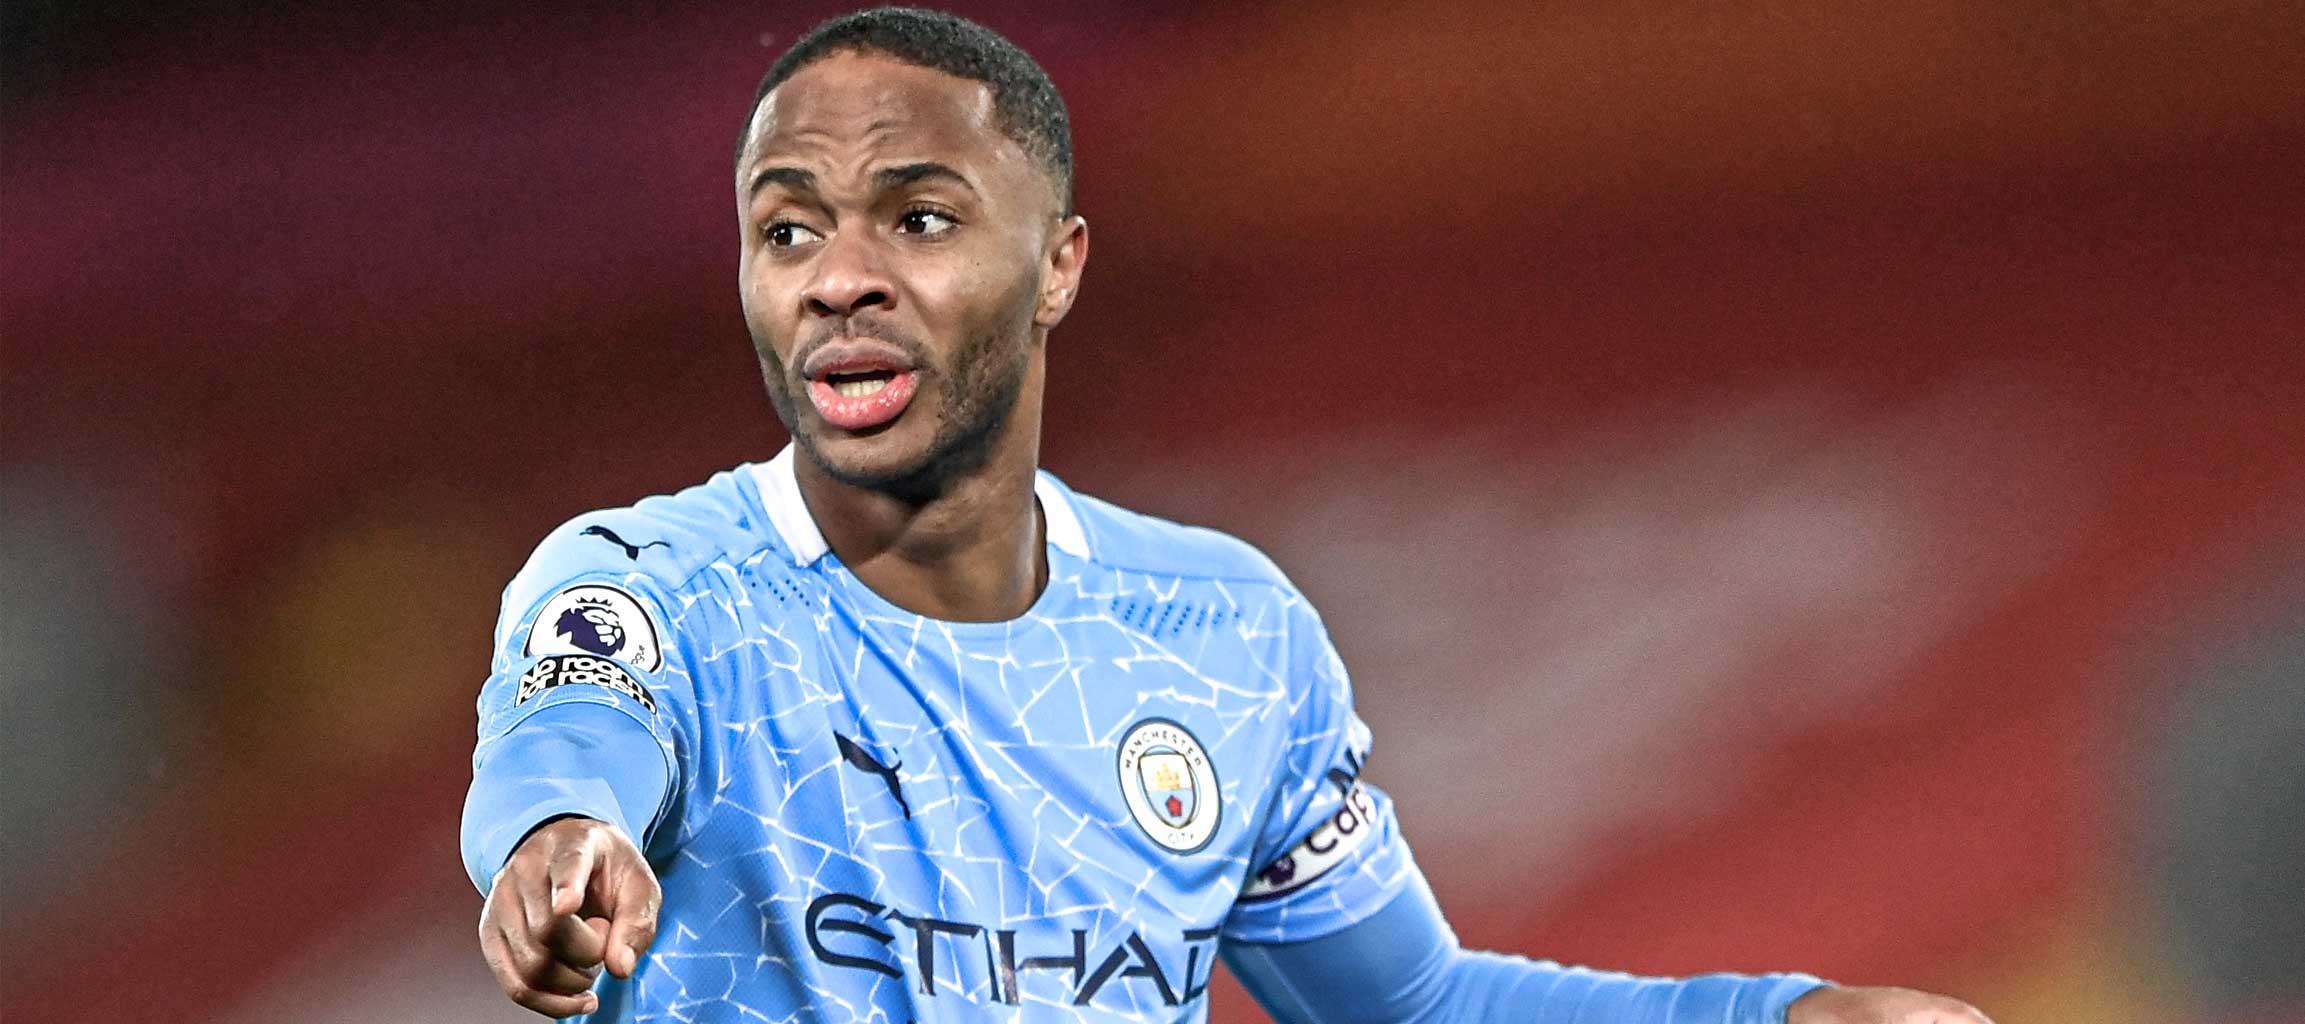 Raheem Sterling : How Good Is Raheem Sterling The Analyst / It's not